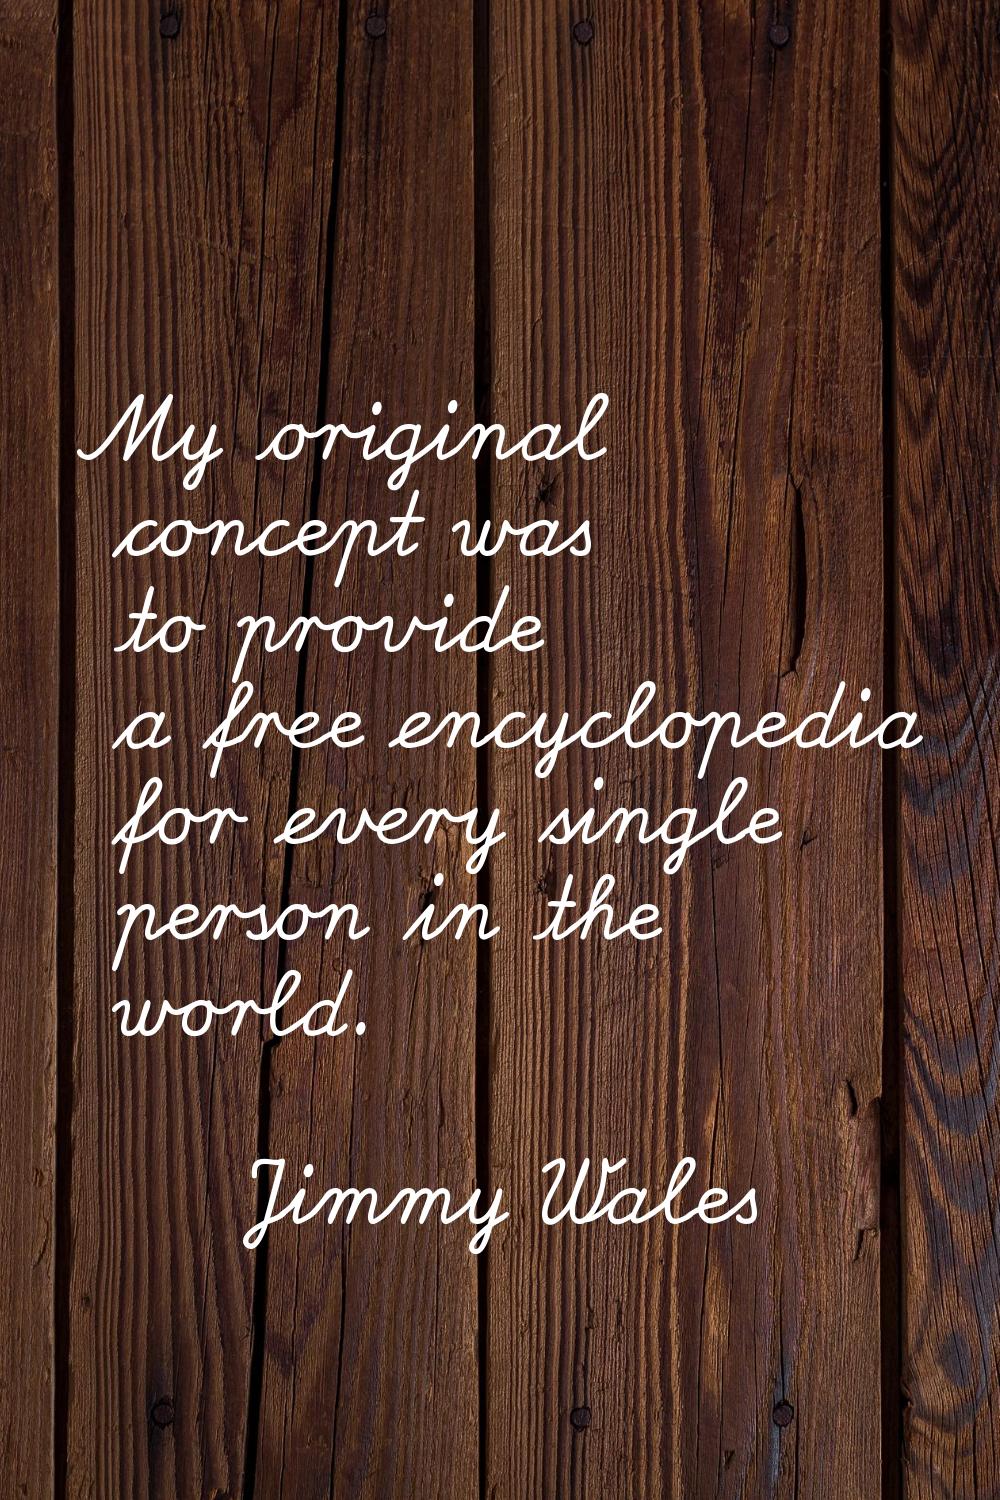 My original concept was to provide a free encyclopedia for every single person in the world.